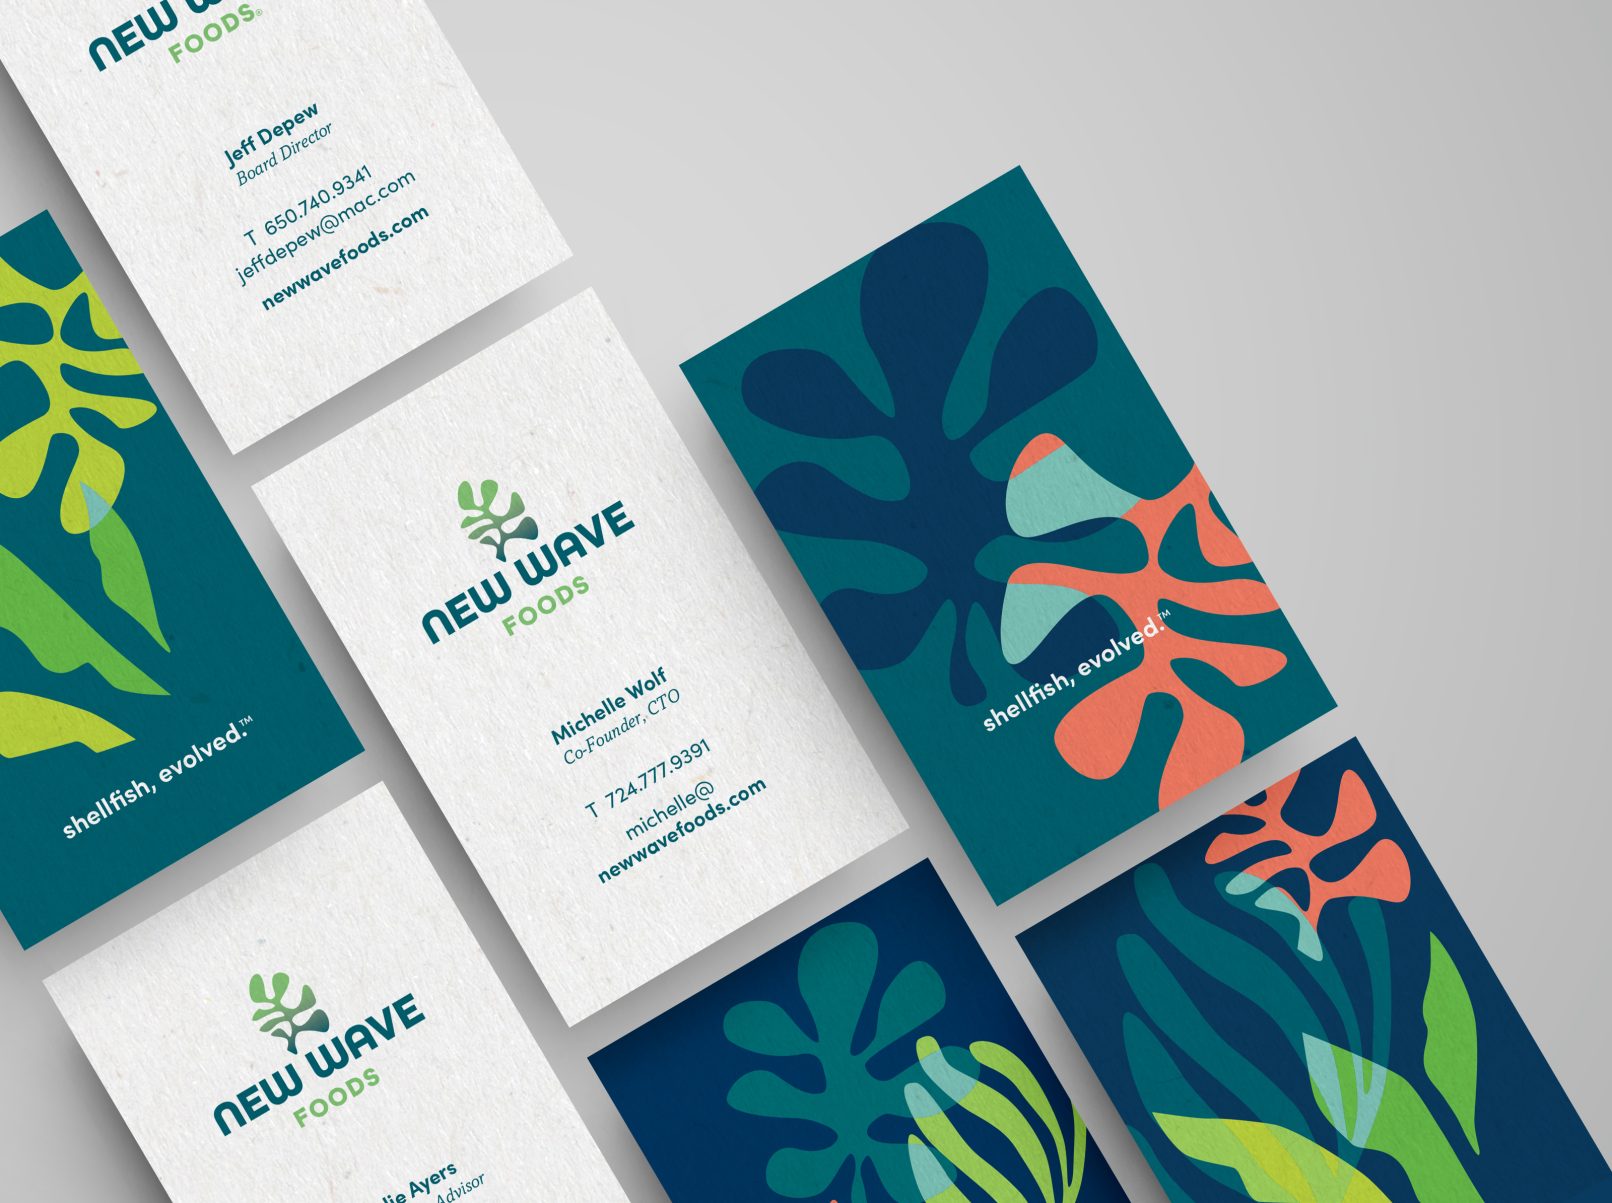 NewWave Foods Business Card design with algae pattern on the back